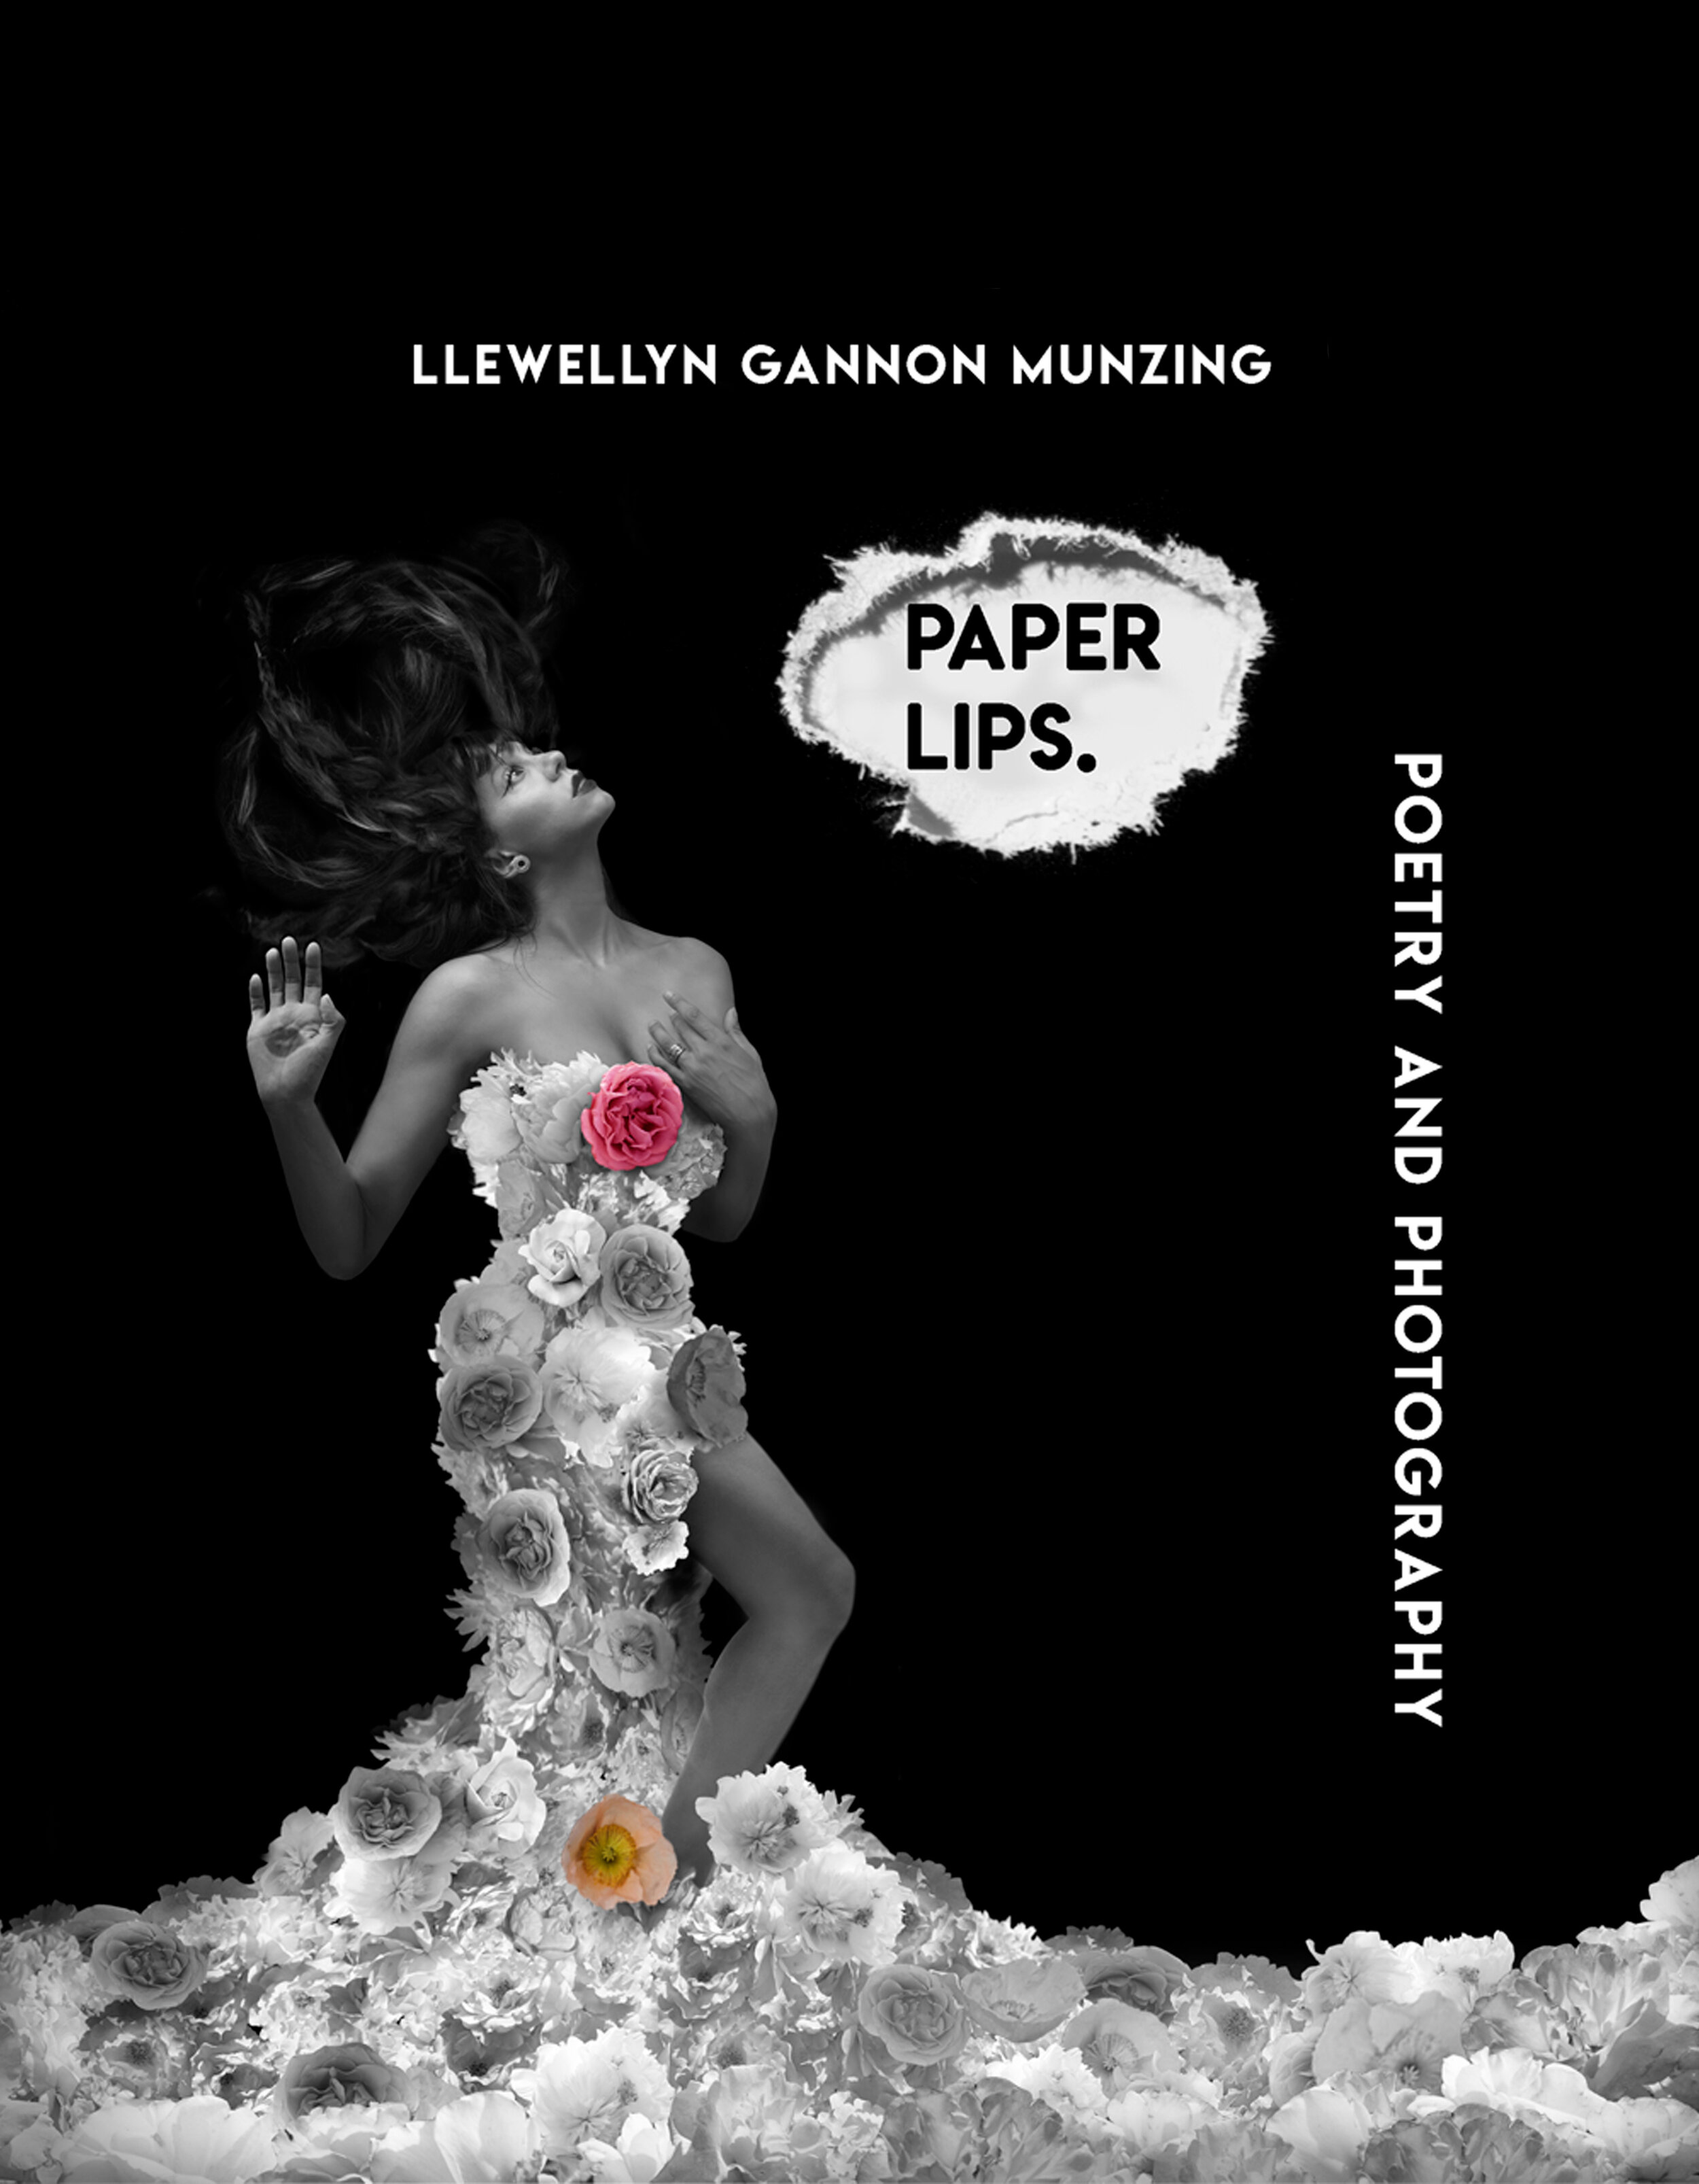 Paper Lips is a poetry and photography book I created over 20 years. It is a coming of age, illustrated with digital self portraits I created in photoshop. Copy link below to purchase book.  